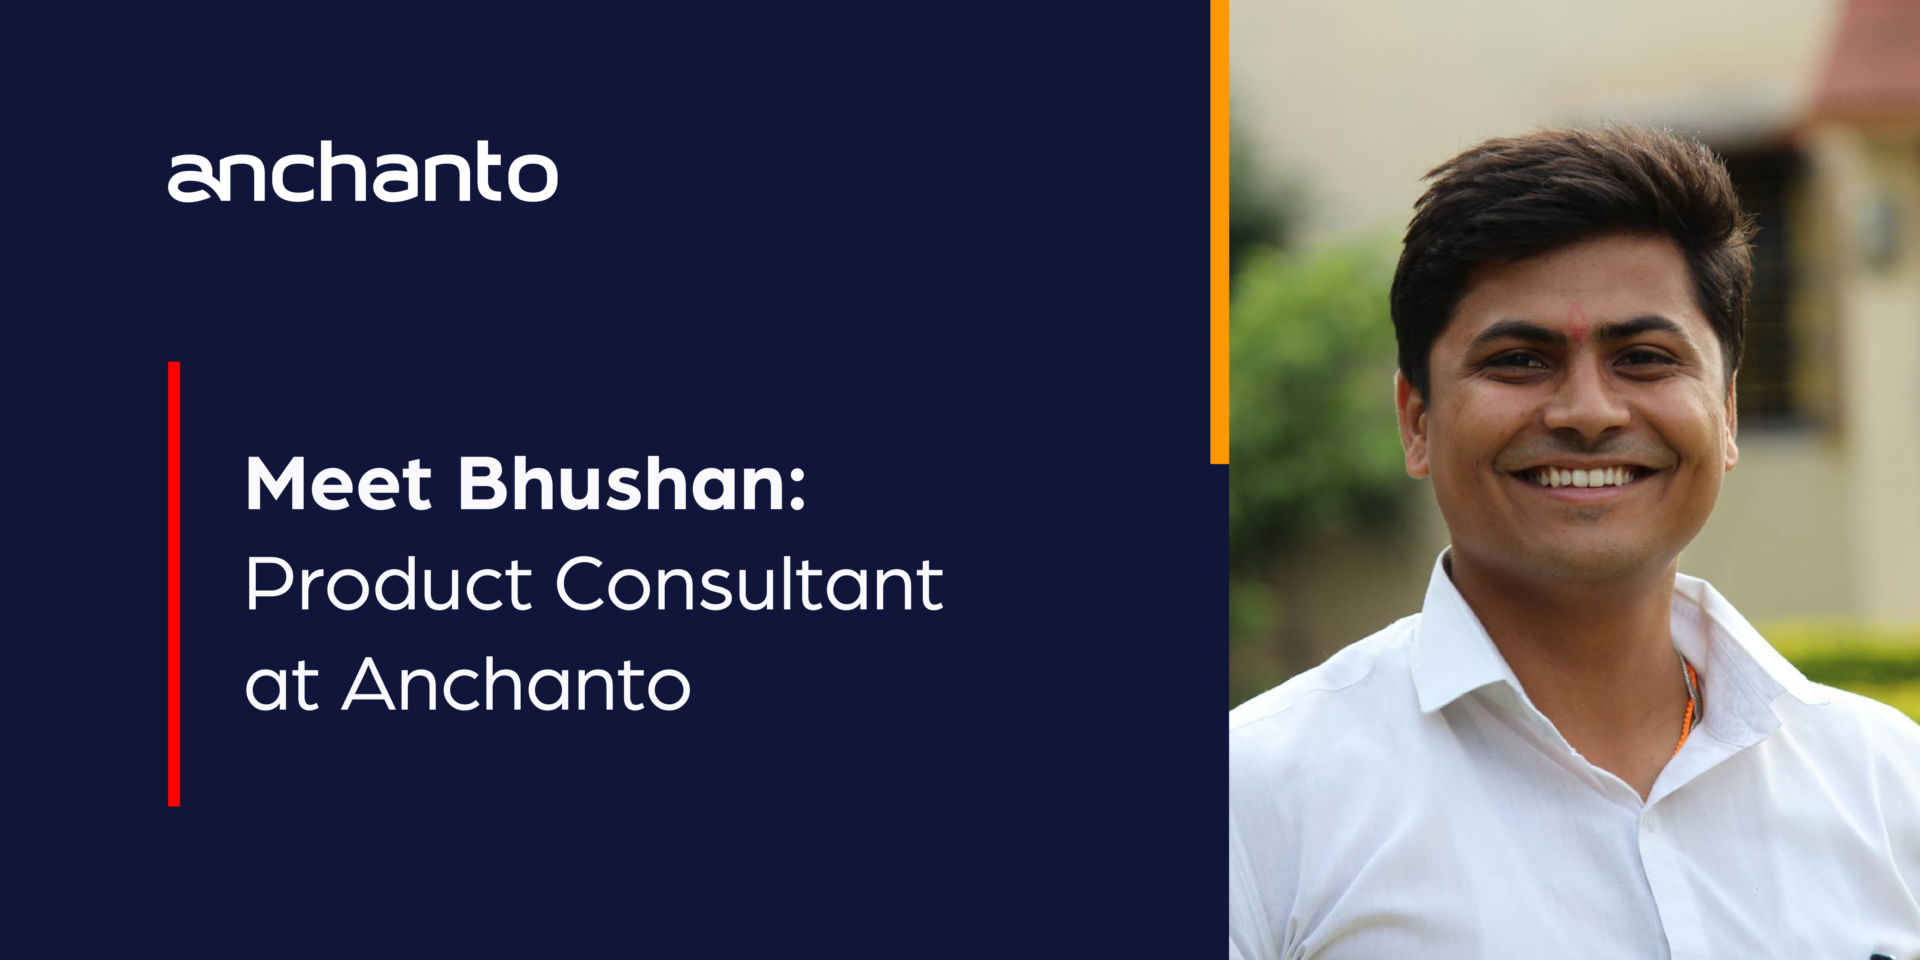 Meet Bhushan: Product Consultant at Anchanto